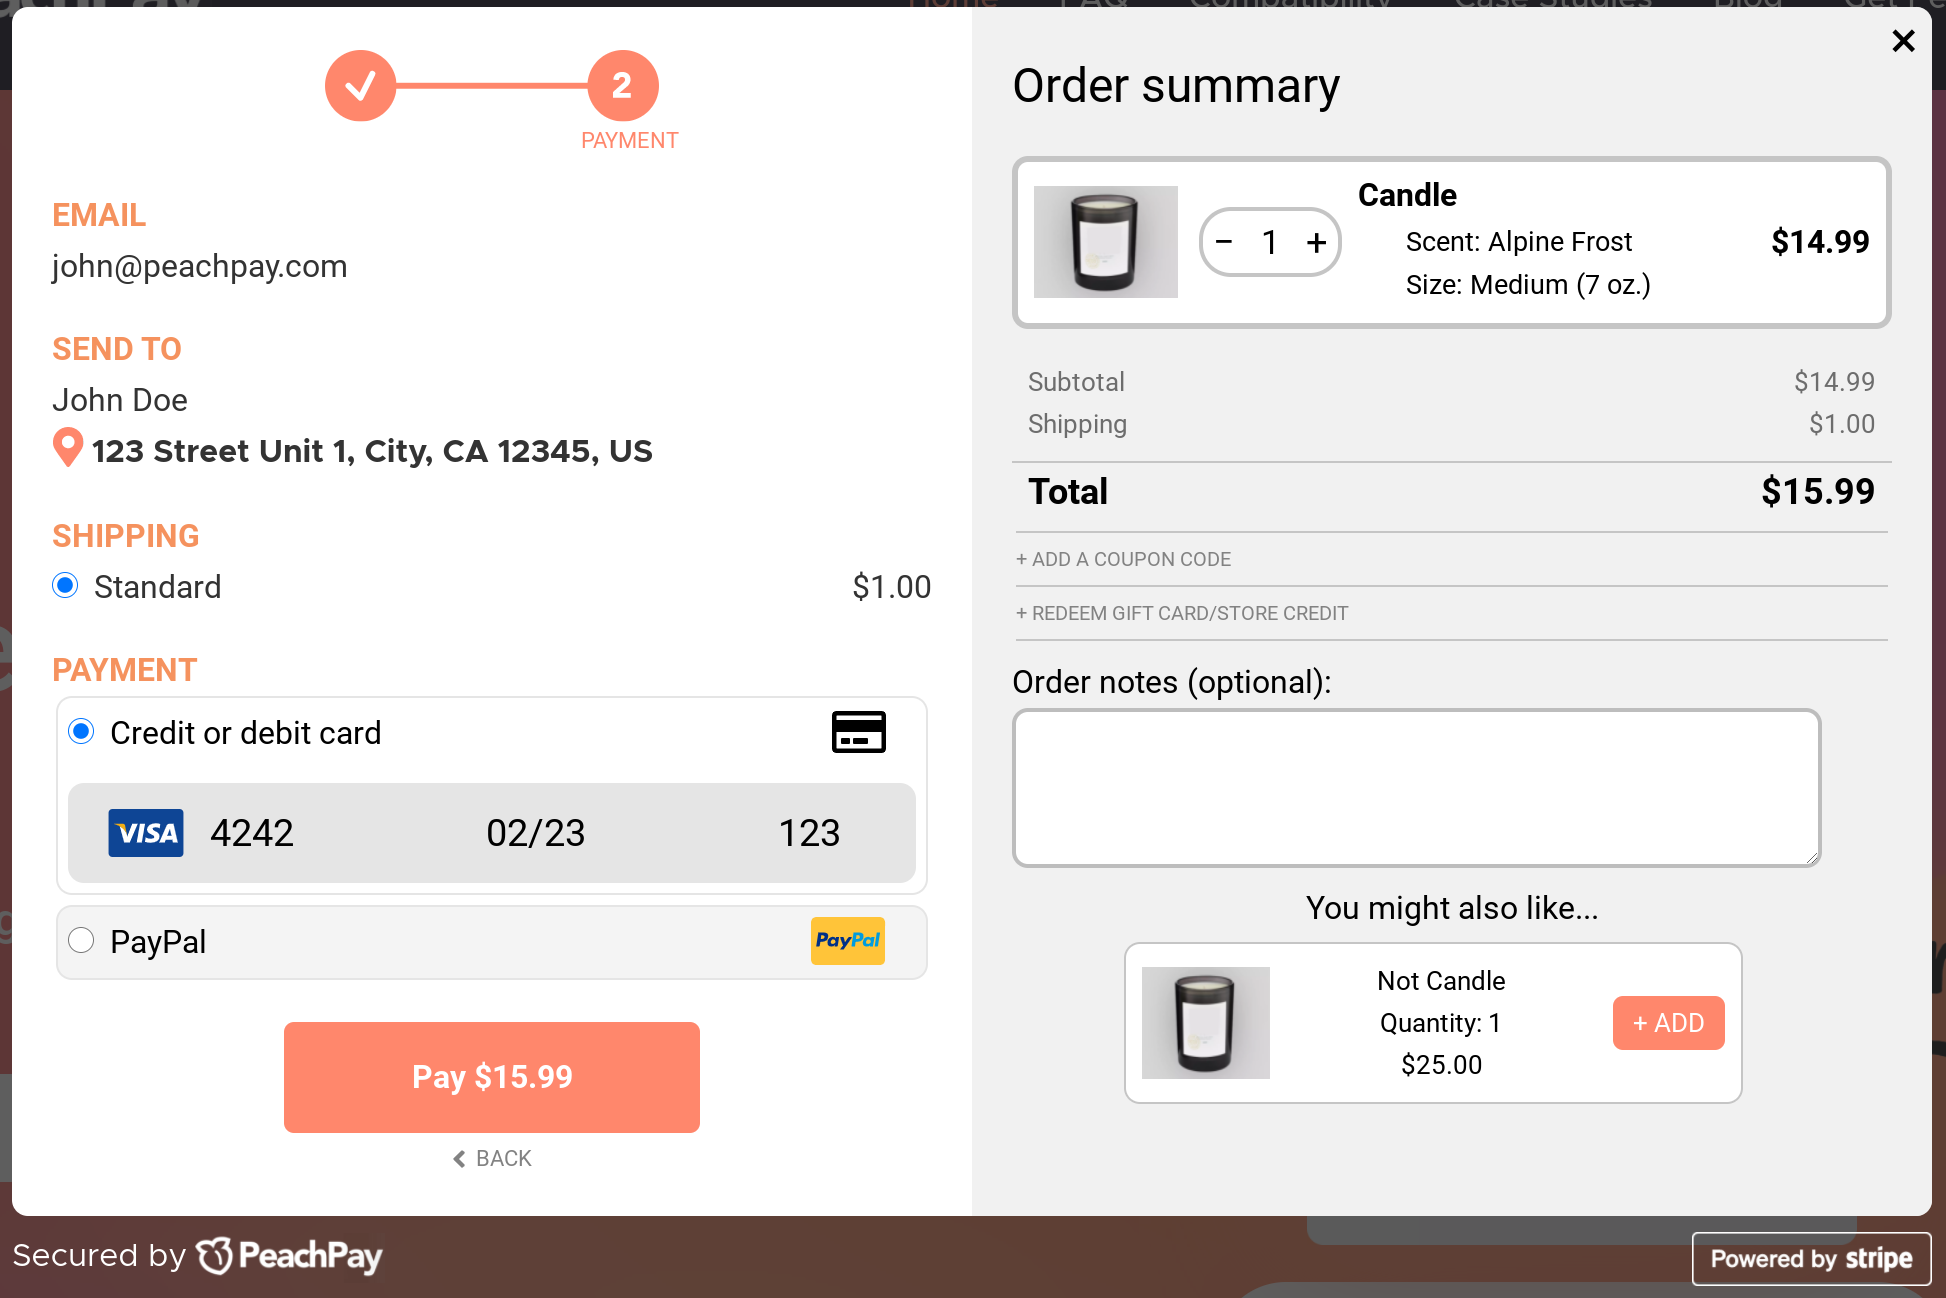 Product recommendations inside PeachPay's checkout window